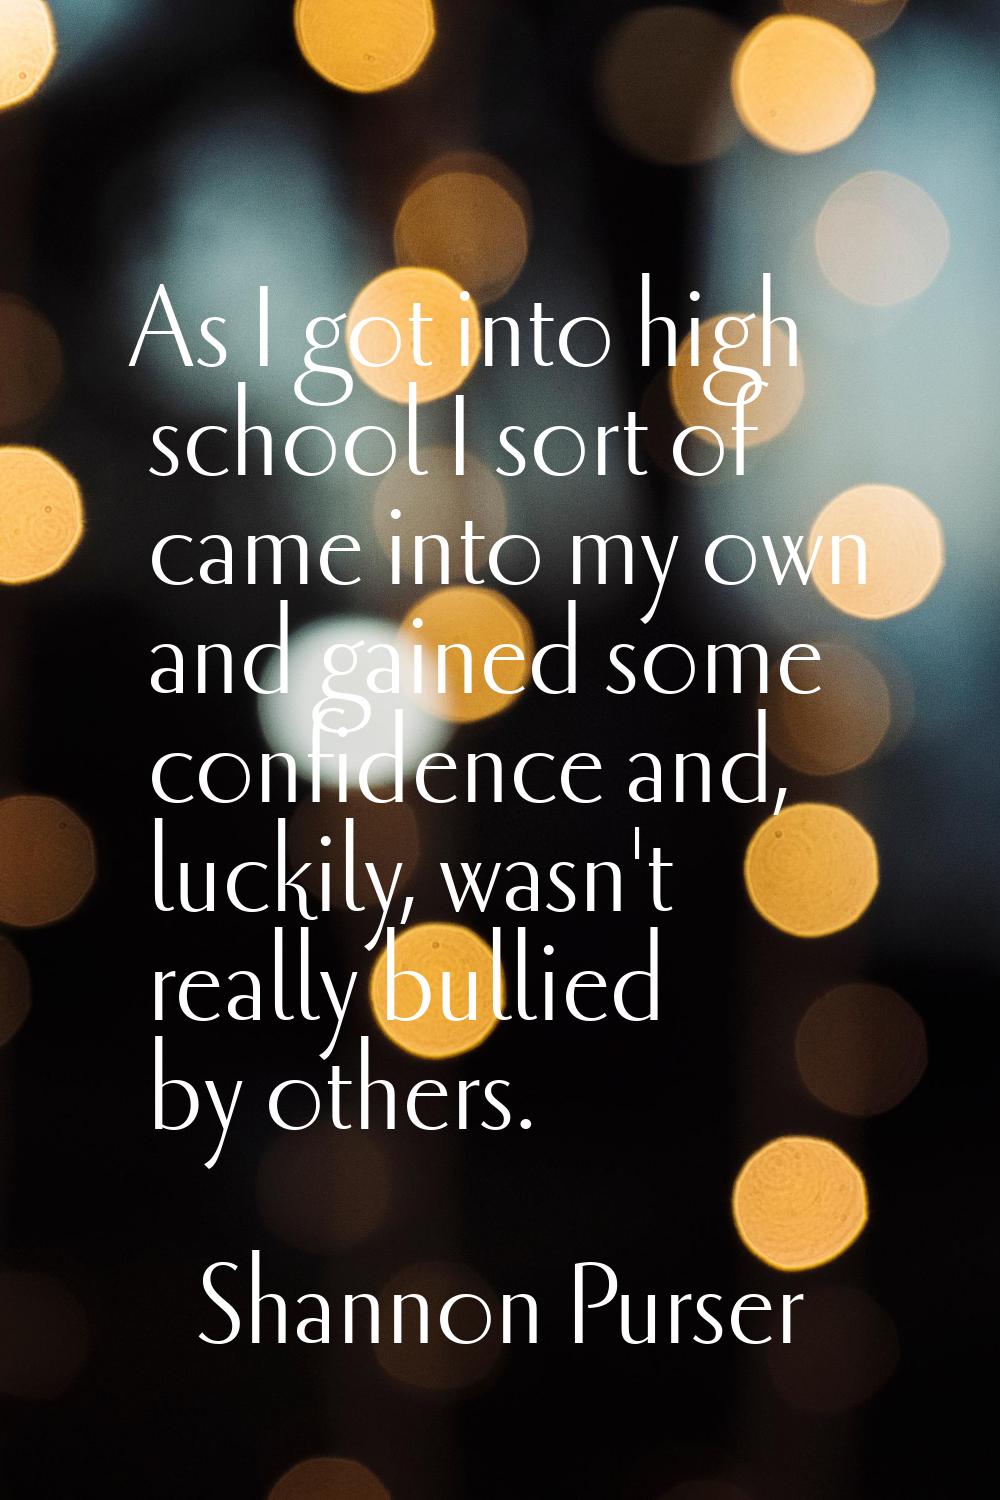 As I got into high school I sort of came into my own and gained some confidence and, luckily, wasn'